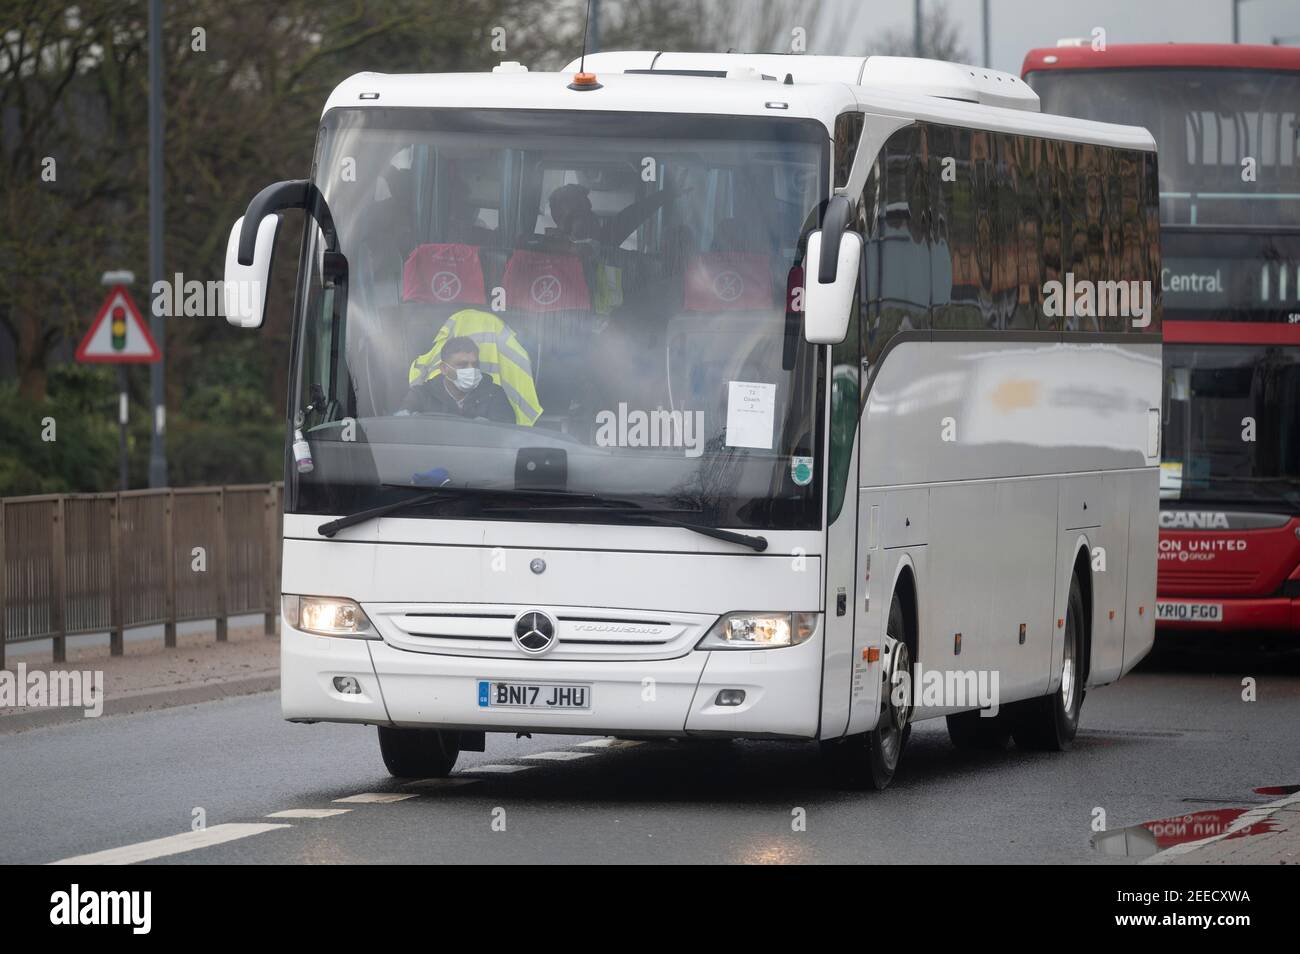 London, Britain. 15th Feb, 2021. Passengers from Heathrow Airport take a bus to Radisson Blu Edwardian Hotel, a quarantine hotel in London, Britain, on Feb. 15, 2021. From Monday, all British and Irish citizens and British residents who arrive in England after being in the 'red list' of more than 30 high-risk countries now have to self-isolate in hotels. The 'red list' countries include South Africa, Portugal and South American nations. Credit: Ray Tang/Xinhua/Alamy Live News Stock Photo